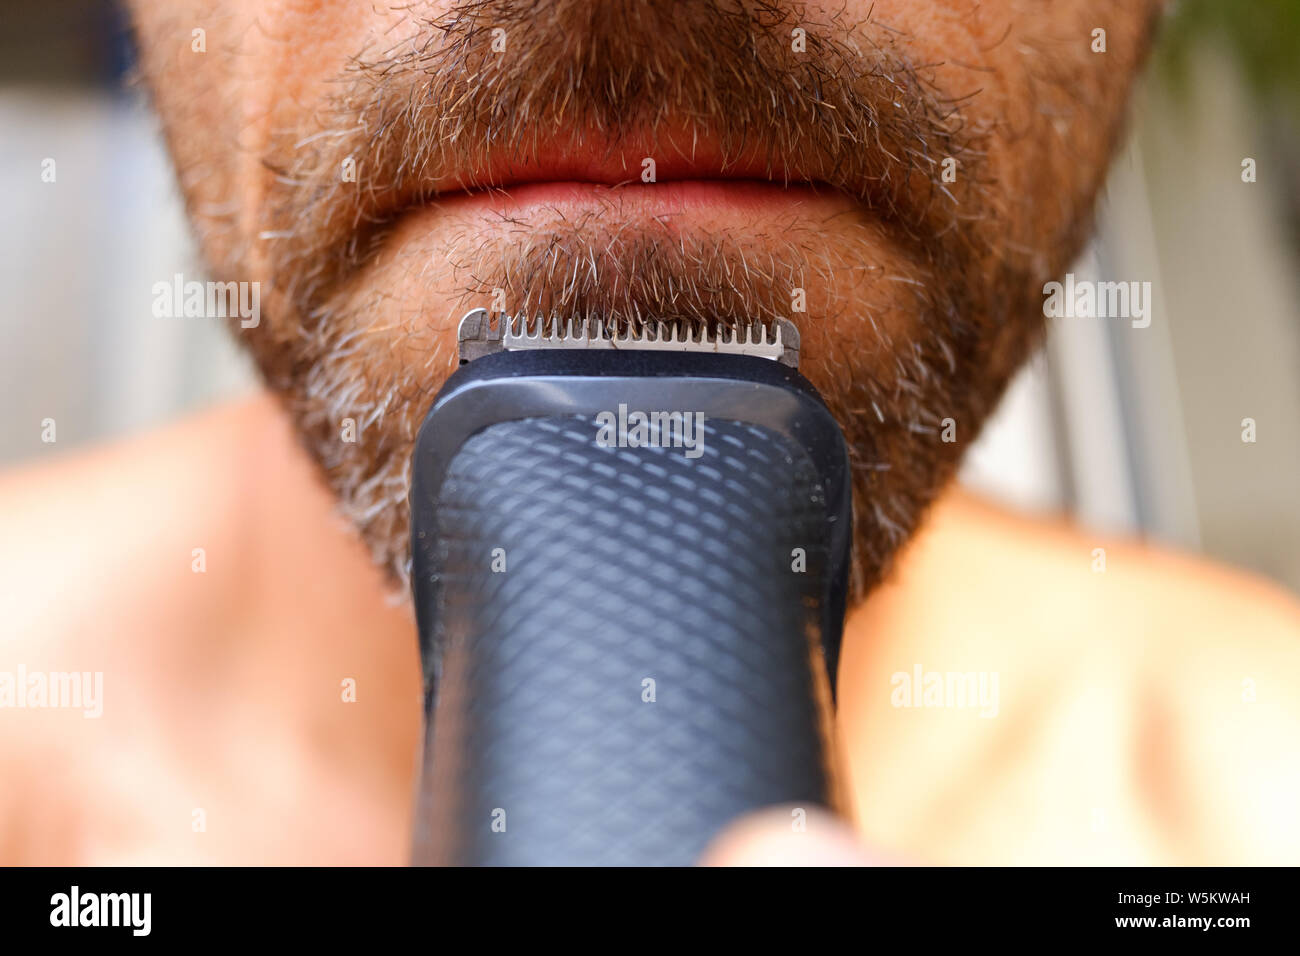 shave beard with hair clippers